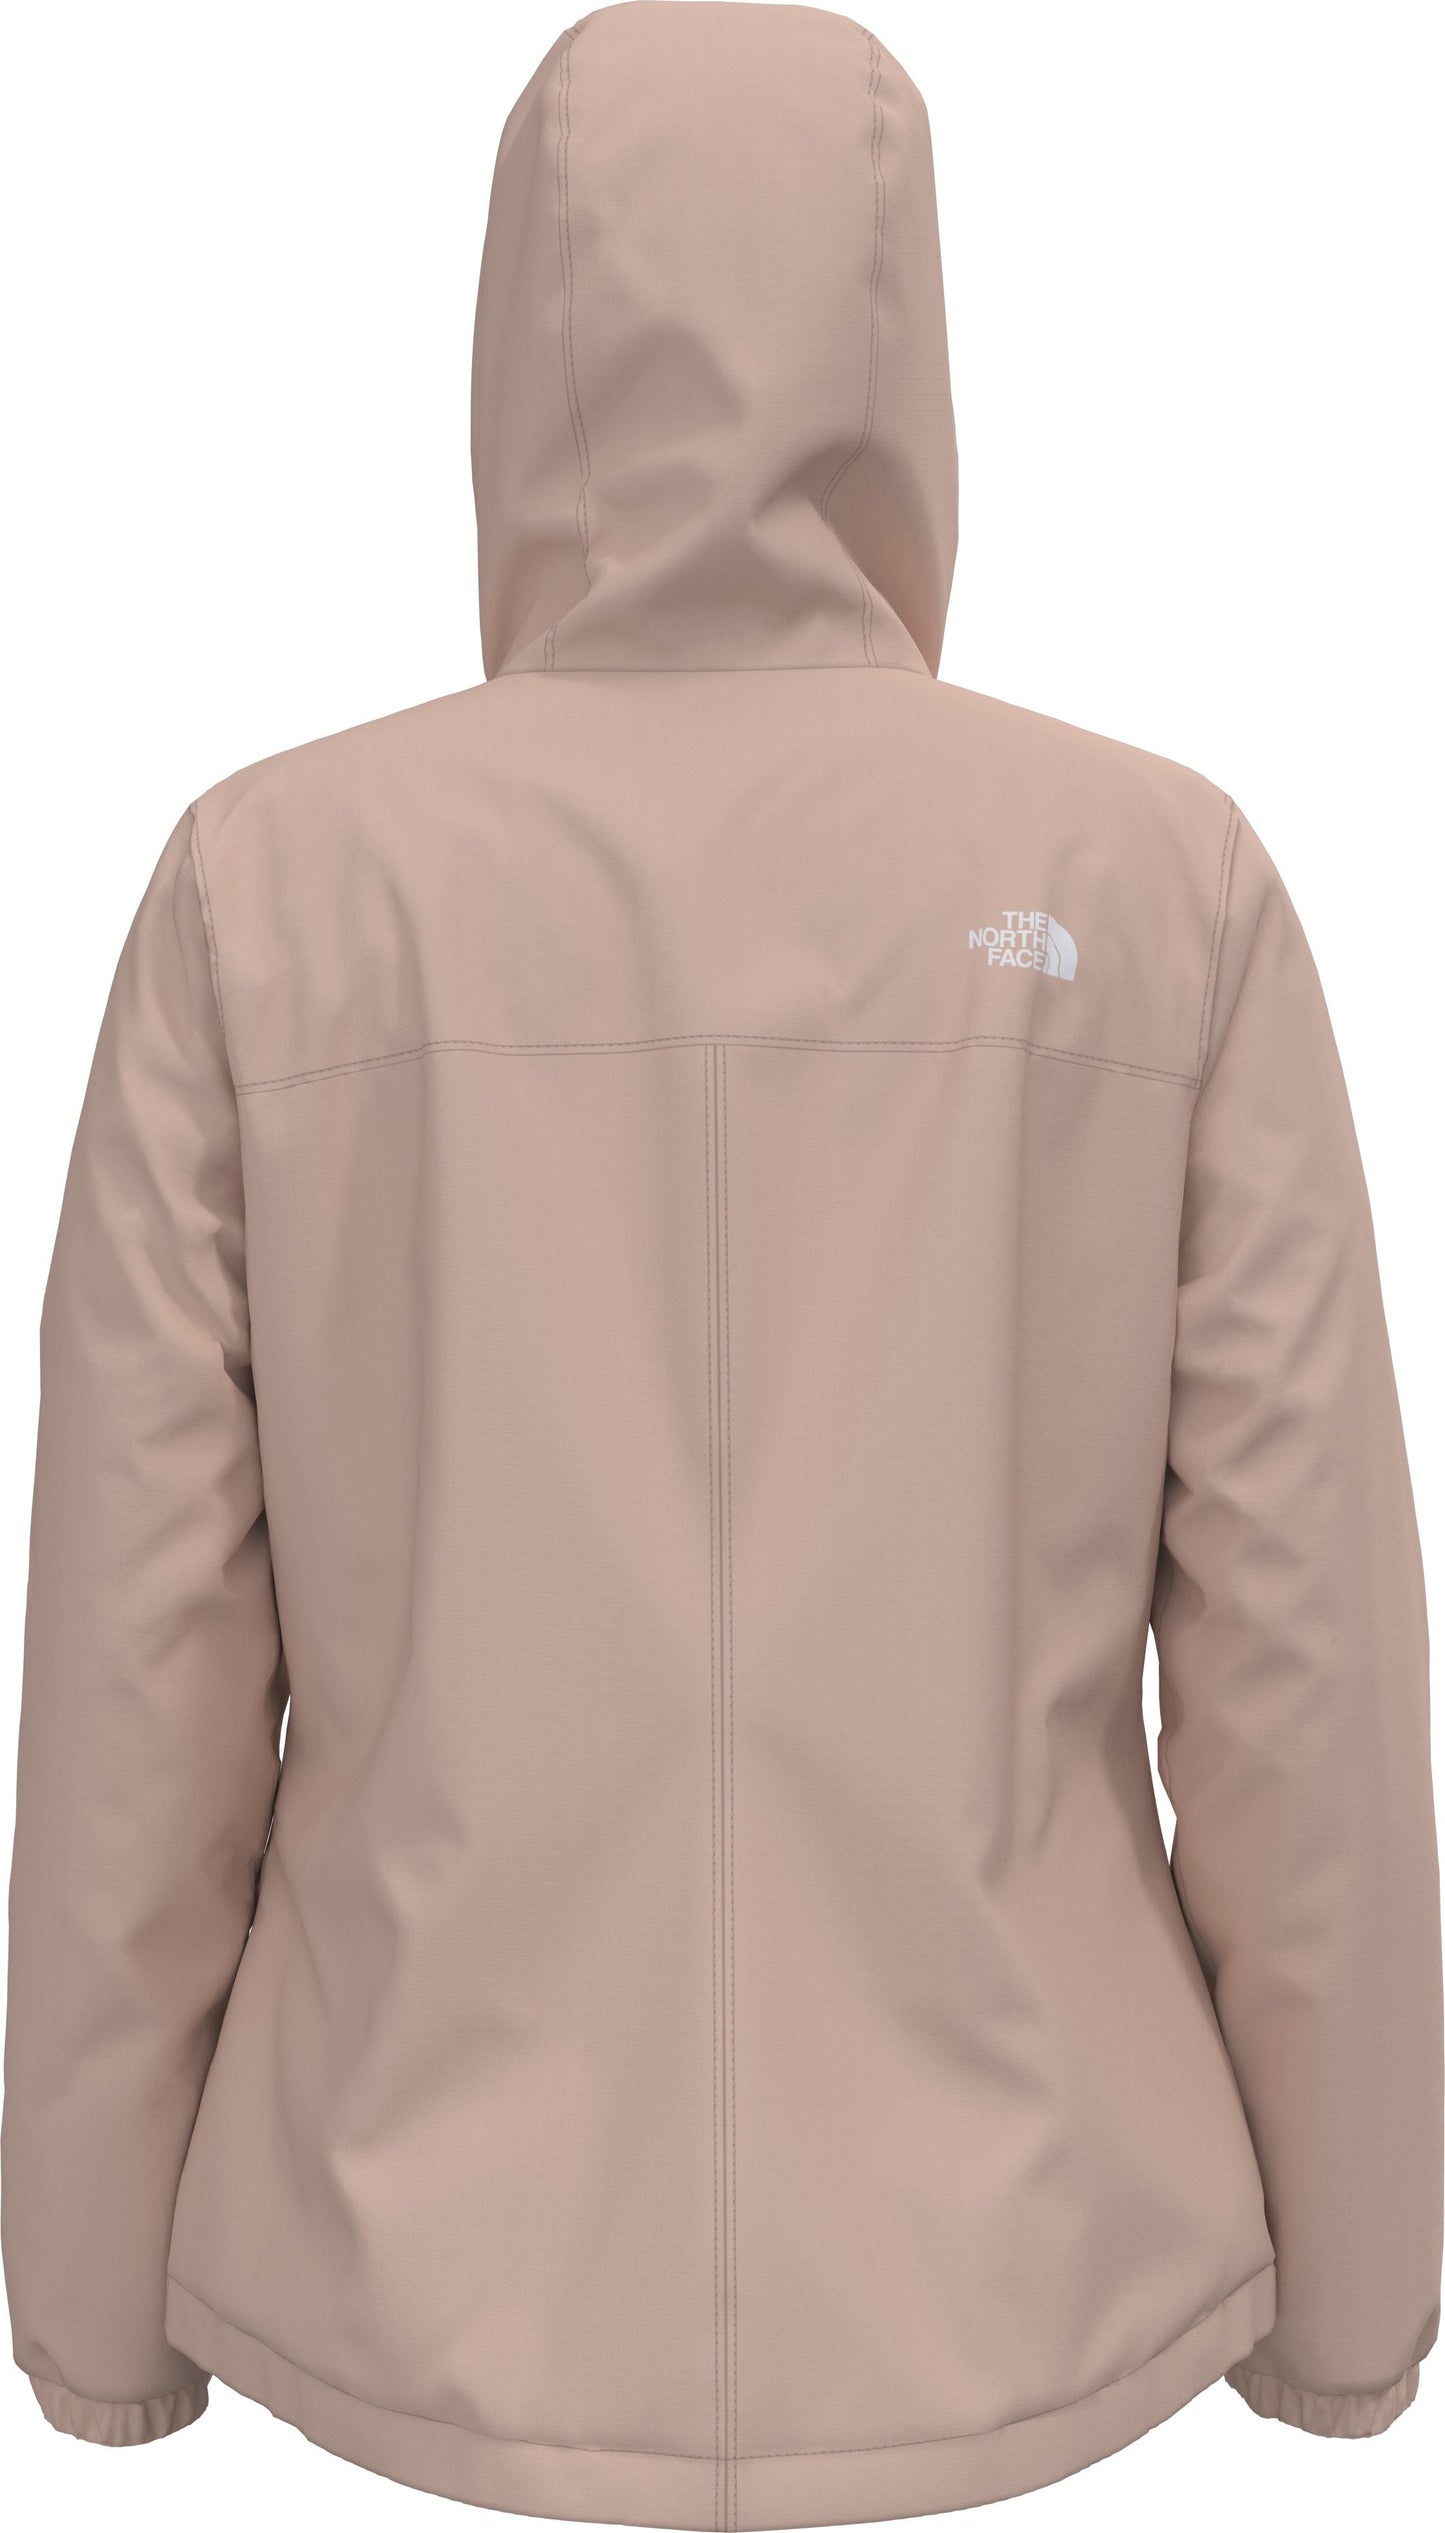 The North Face Apparel Women's Antora Jacket Evening Sand Pink